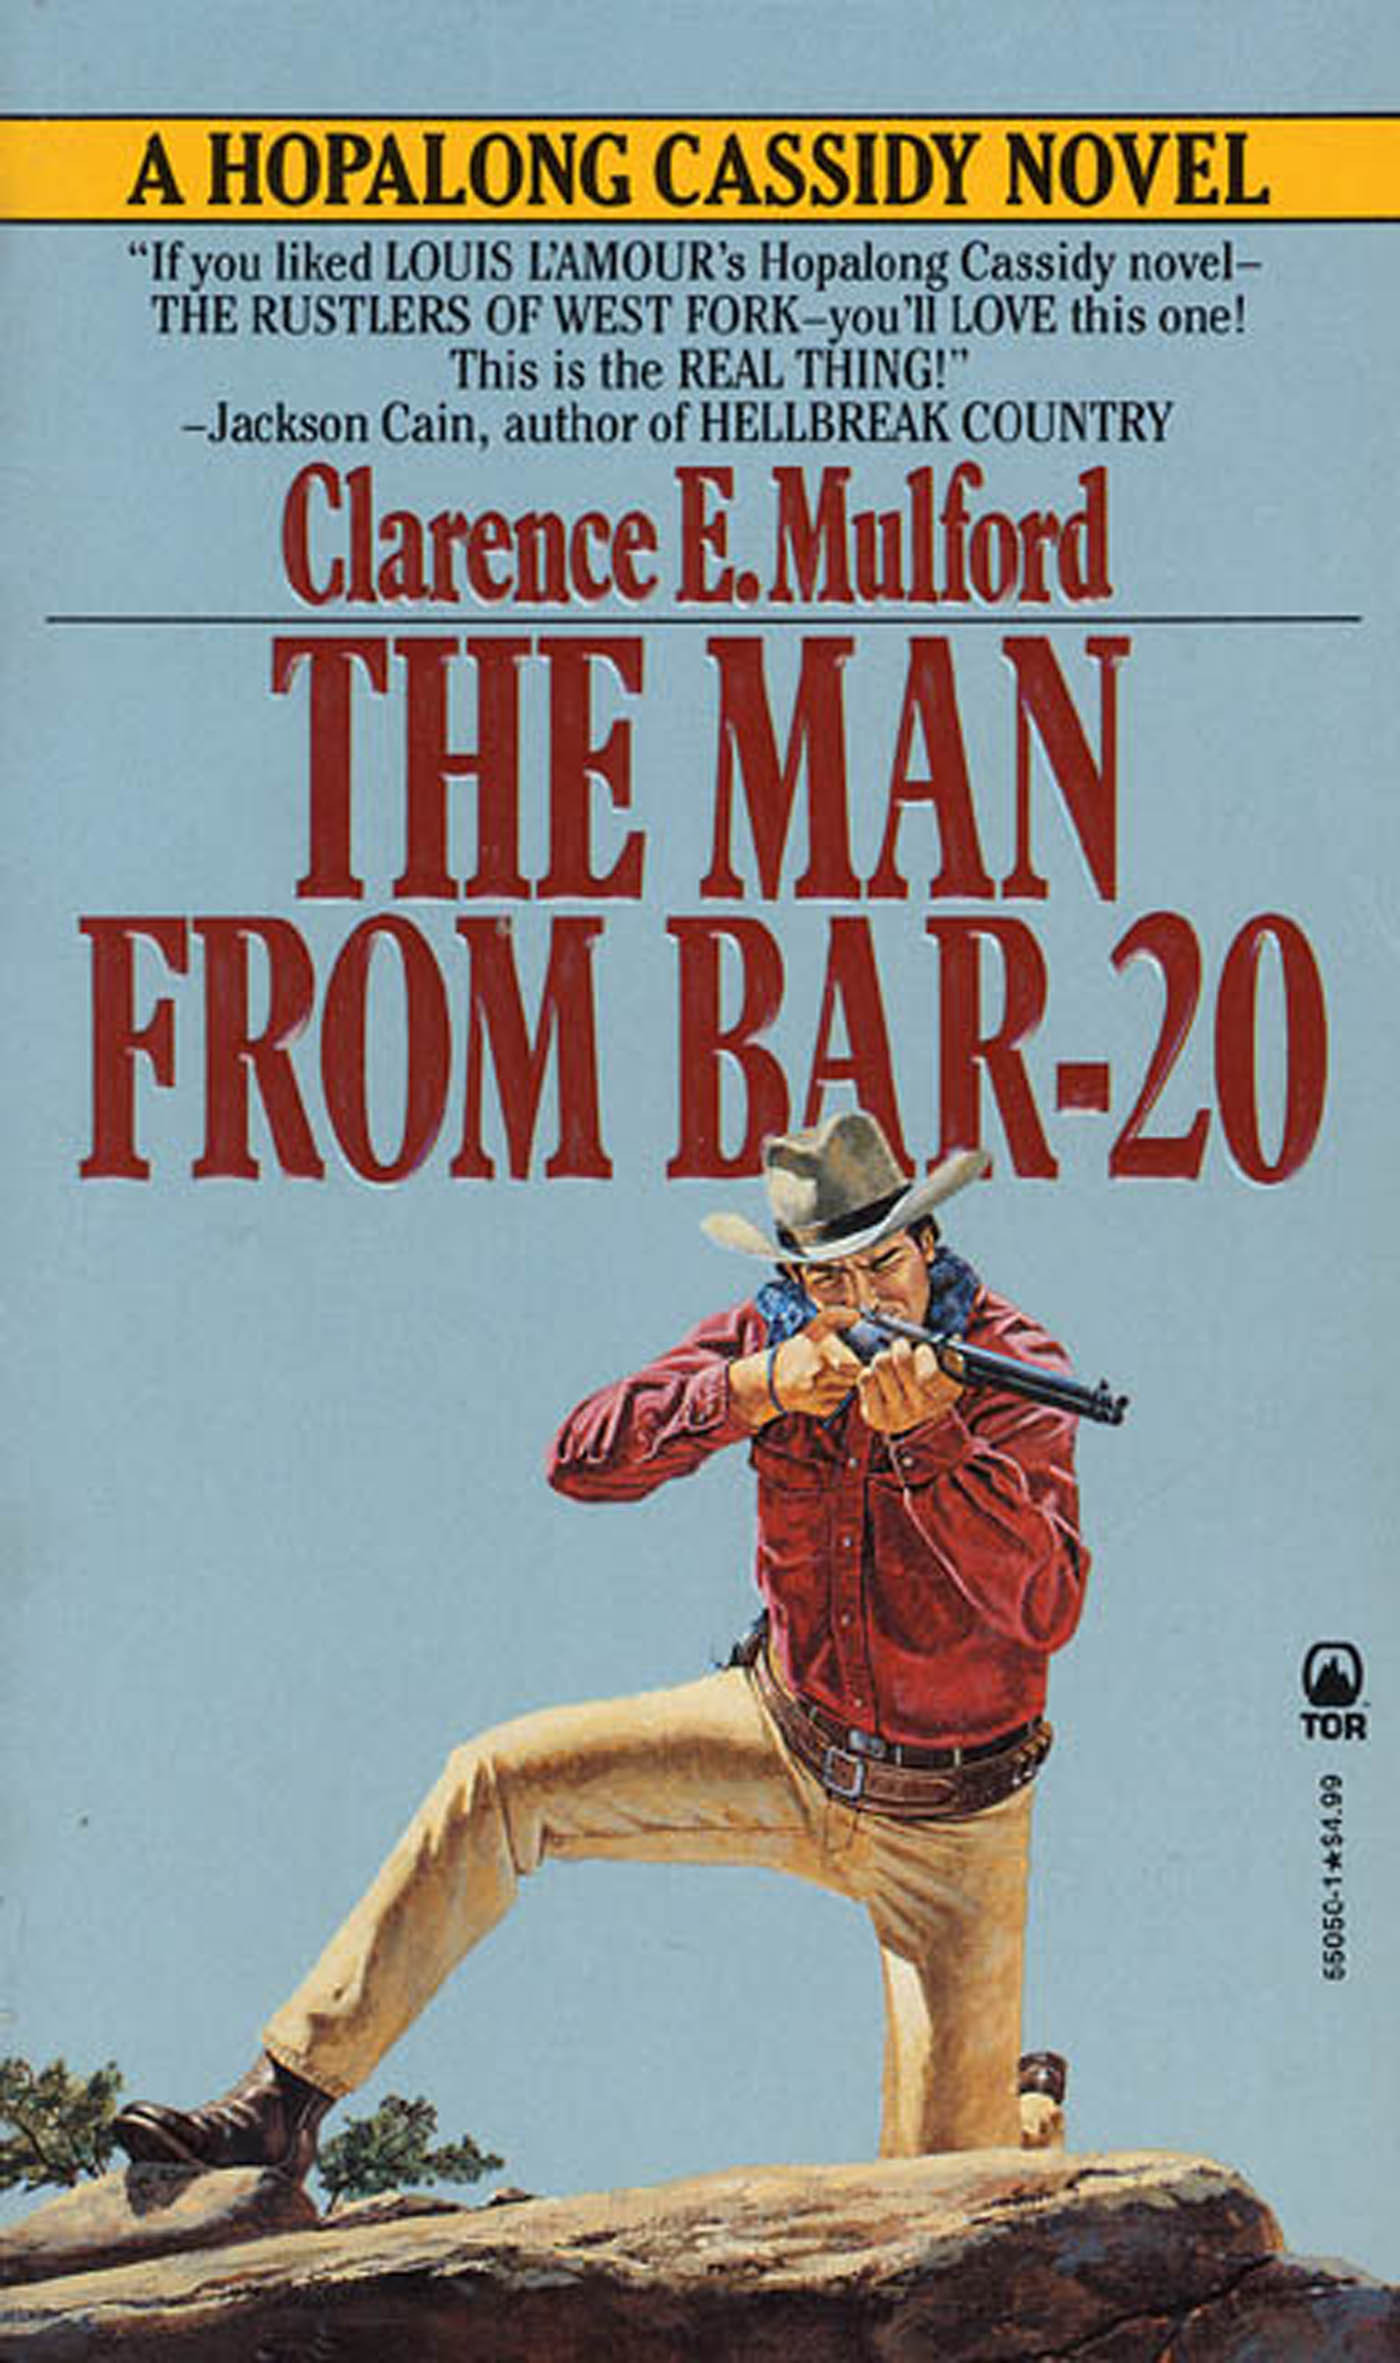 The Man From Bar-20 : A Hopalong Cassidy Novel by Clarence E. Mulford